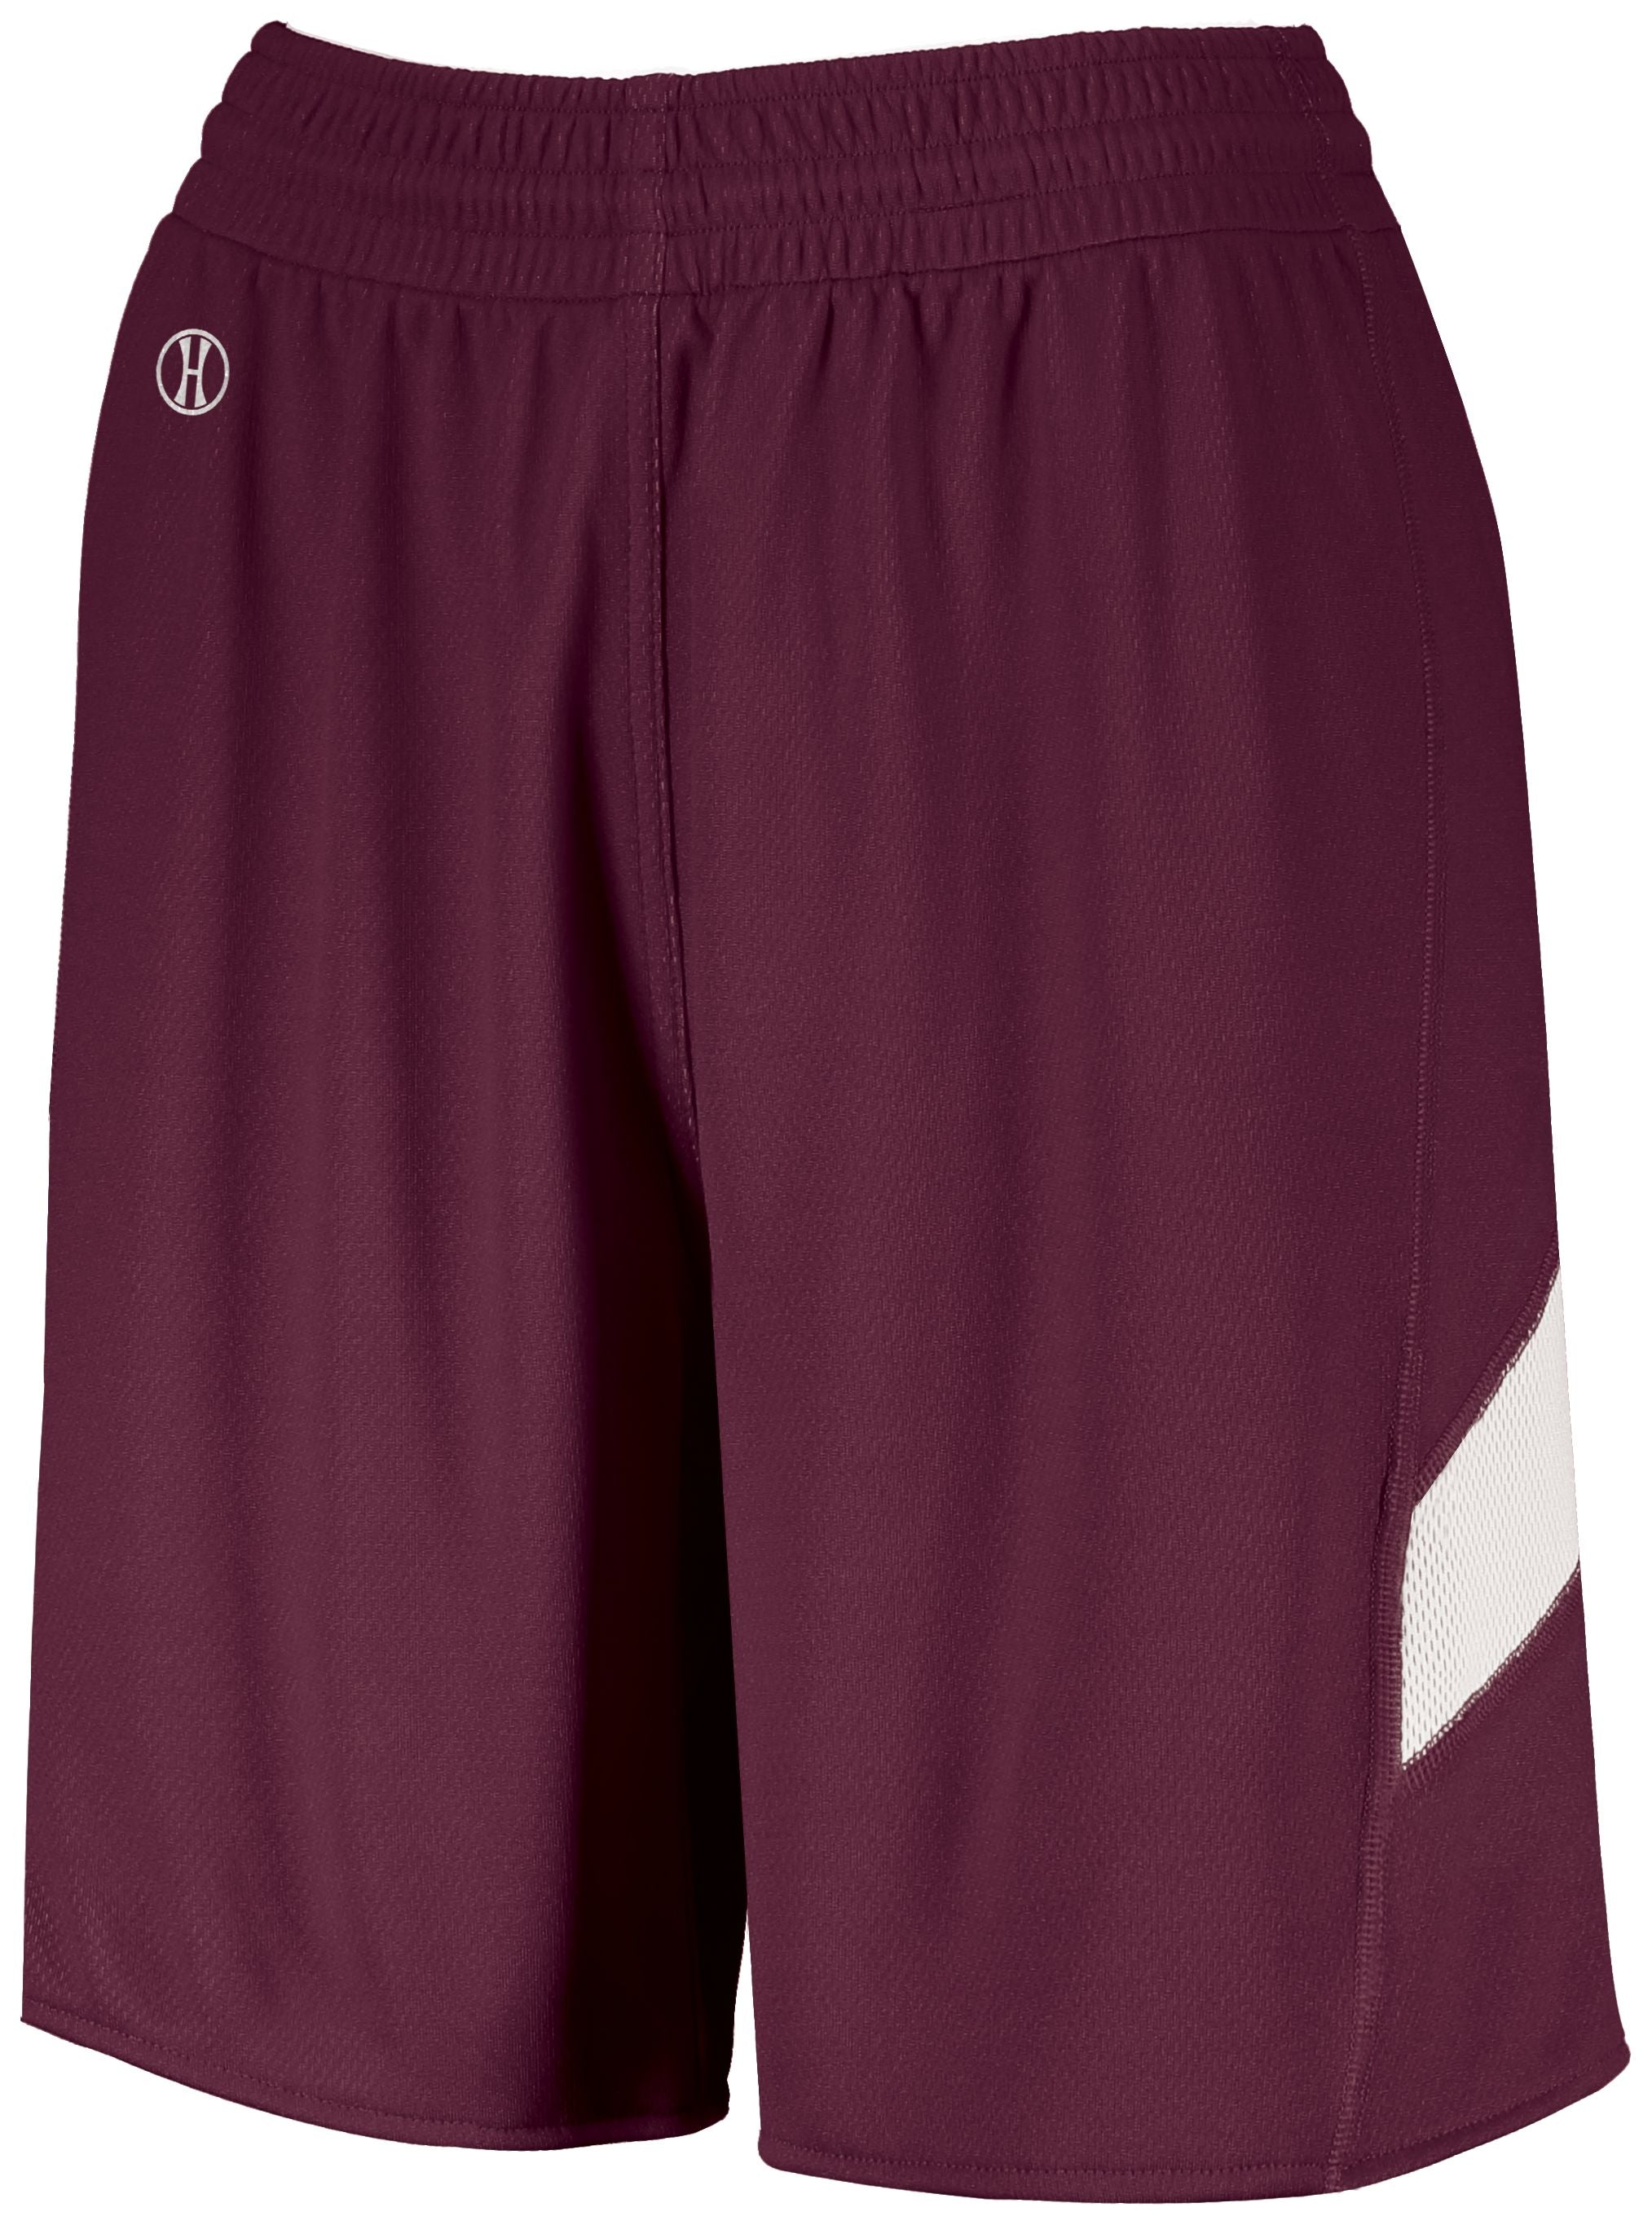 Holloway Ladies Dual-Side Single Ply Shorts in Maroon/White  -Part of the Ladies, Ladies-Shorts, Basketball, Holloway, All-Sports, All-Sports-1 product lines at KanaleyCreations.com